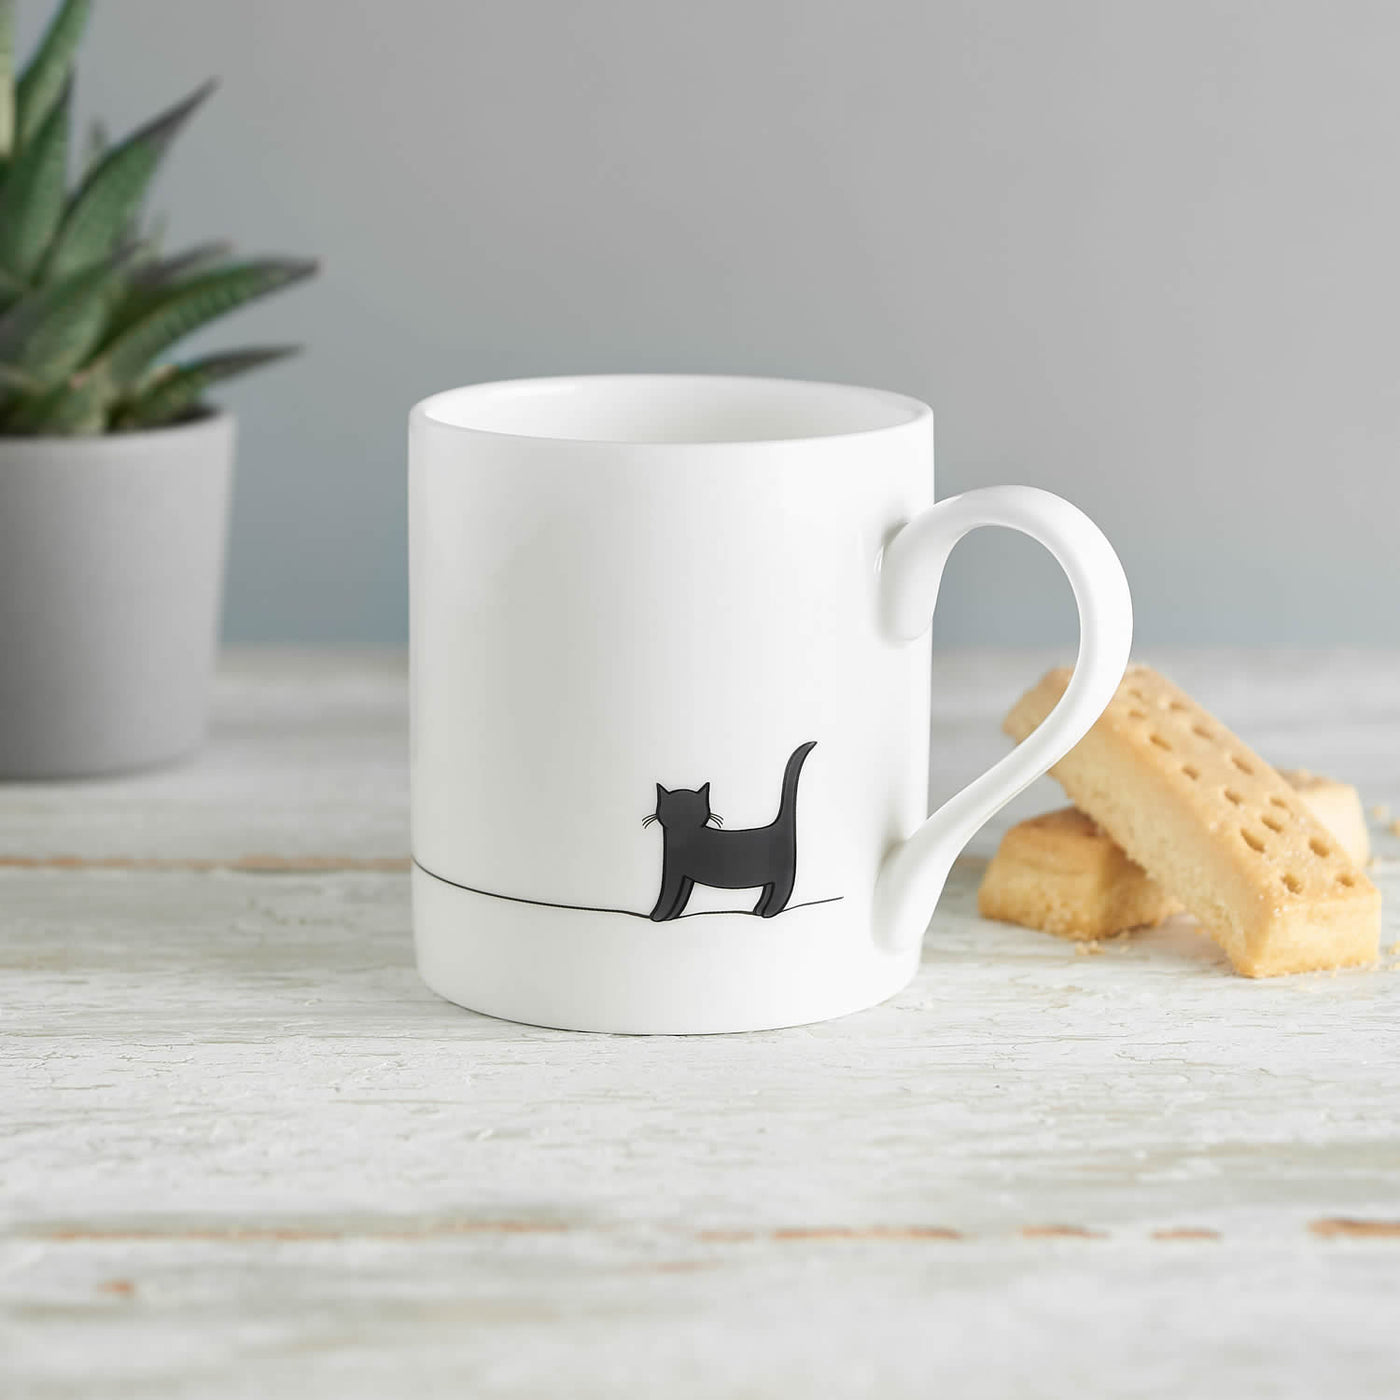 Standing Cat Mug with Shortbread